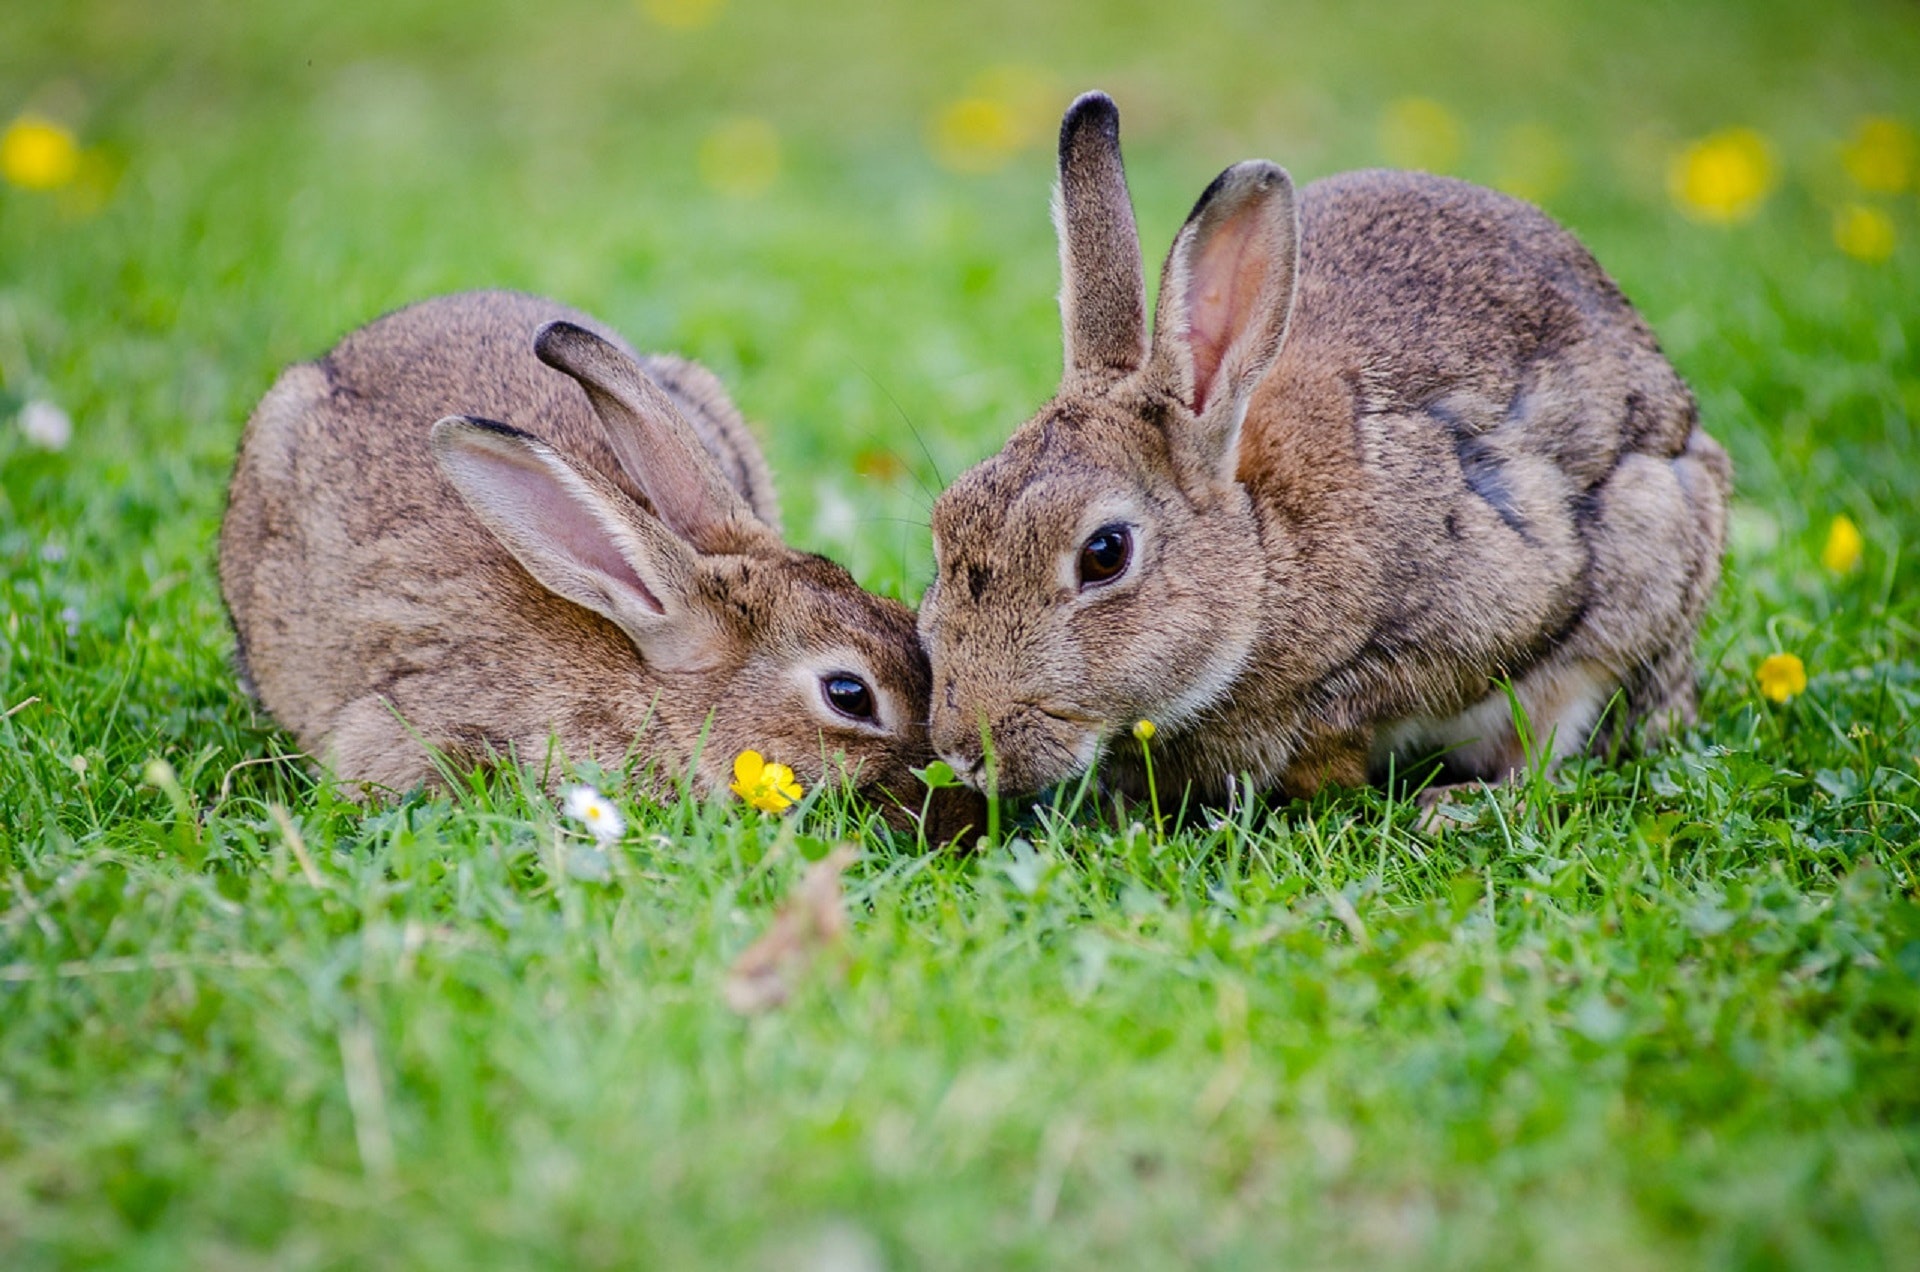 is there a difference between a rabbit and a hare